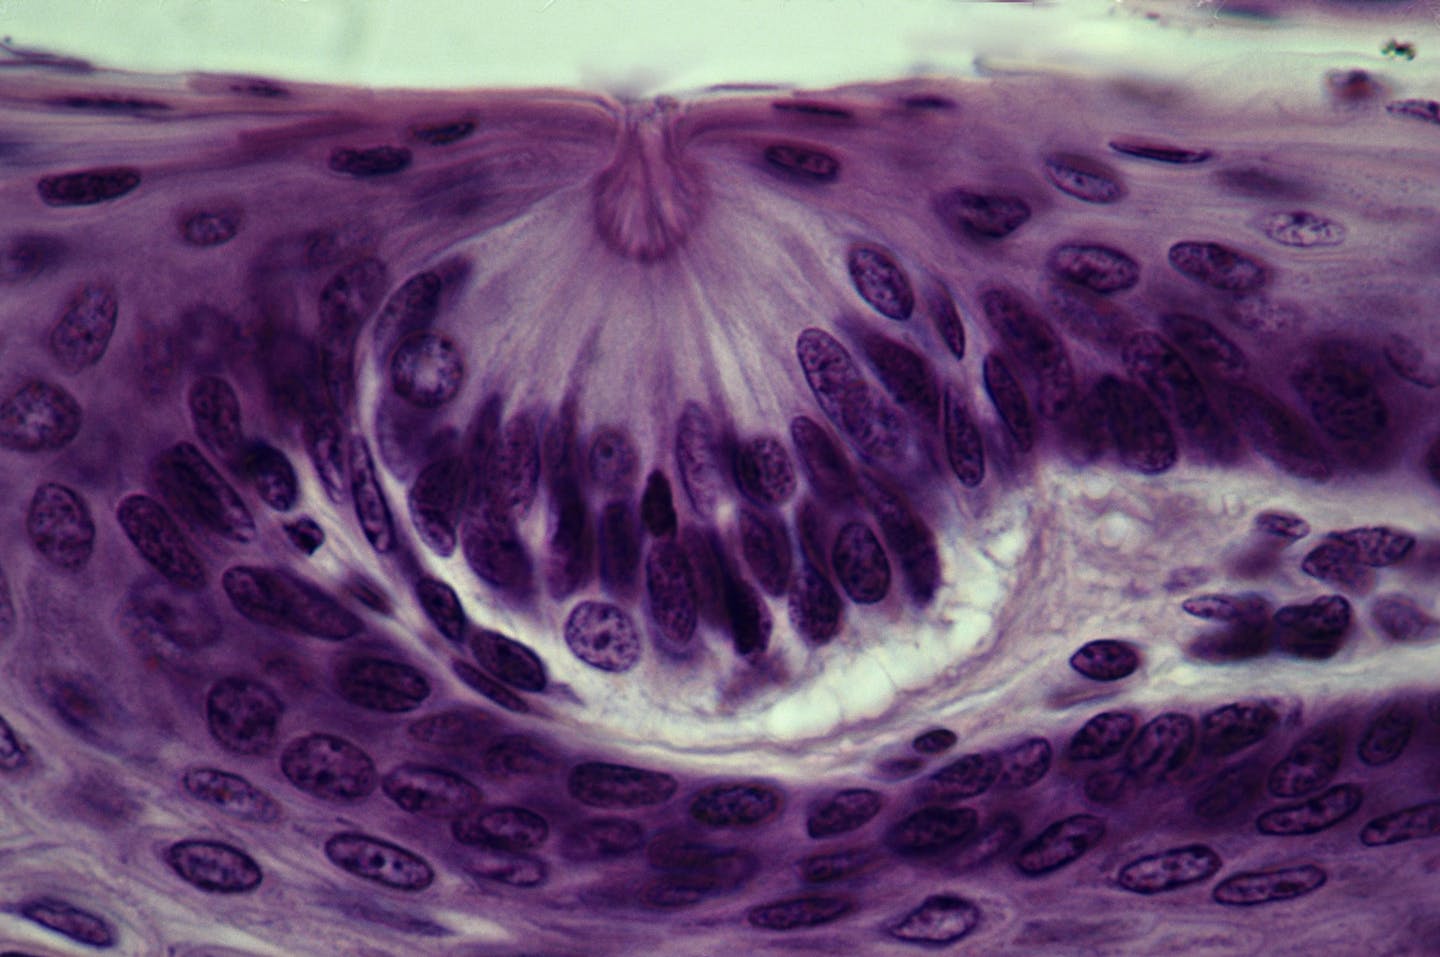 Microscopic view of cells just beneath tongue's surface.